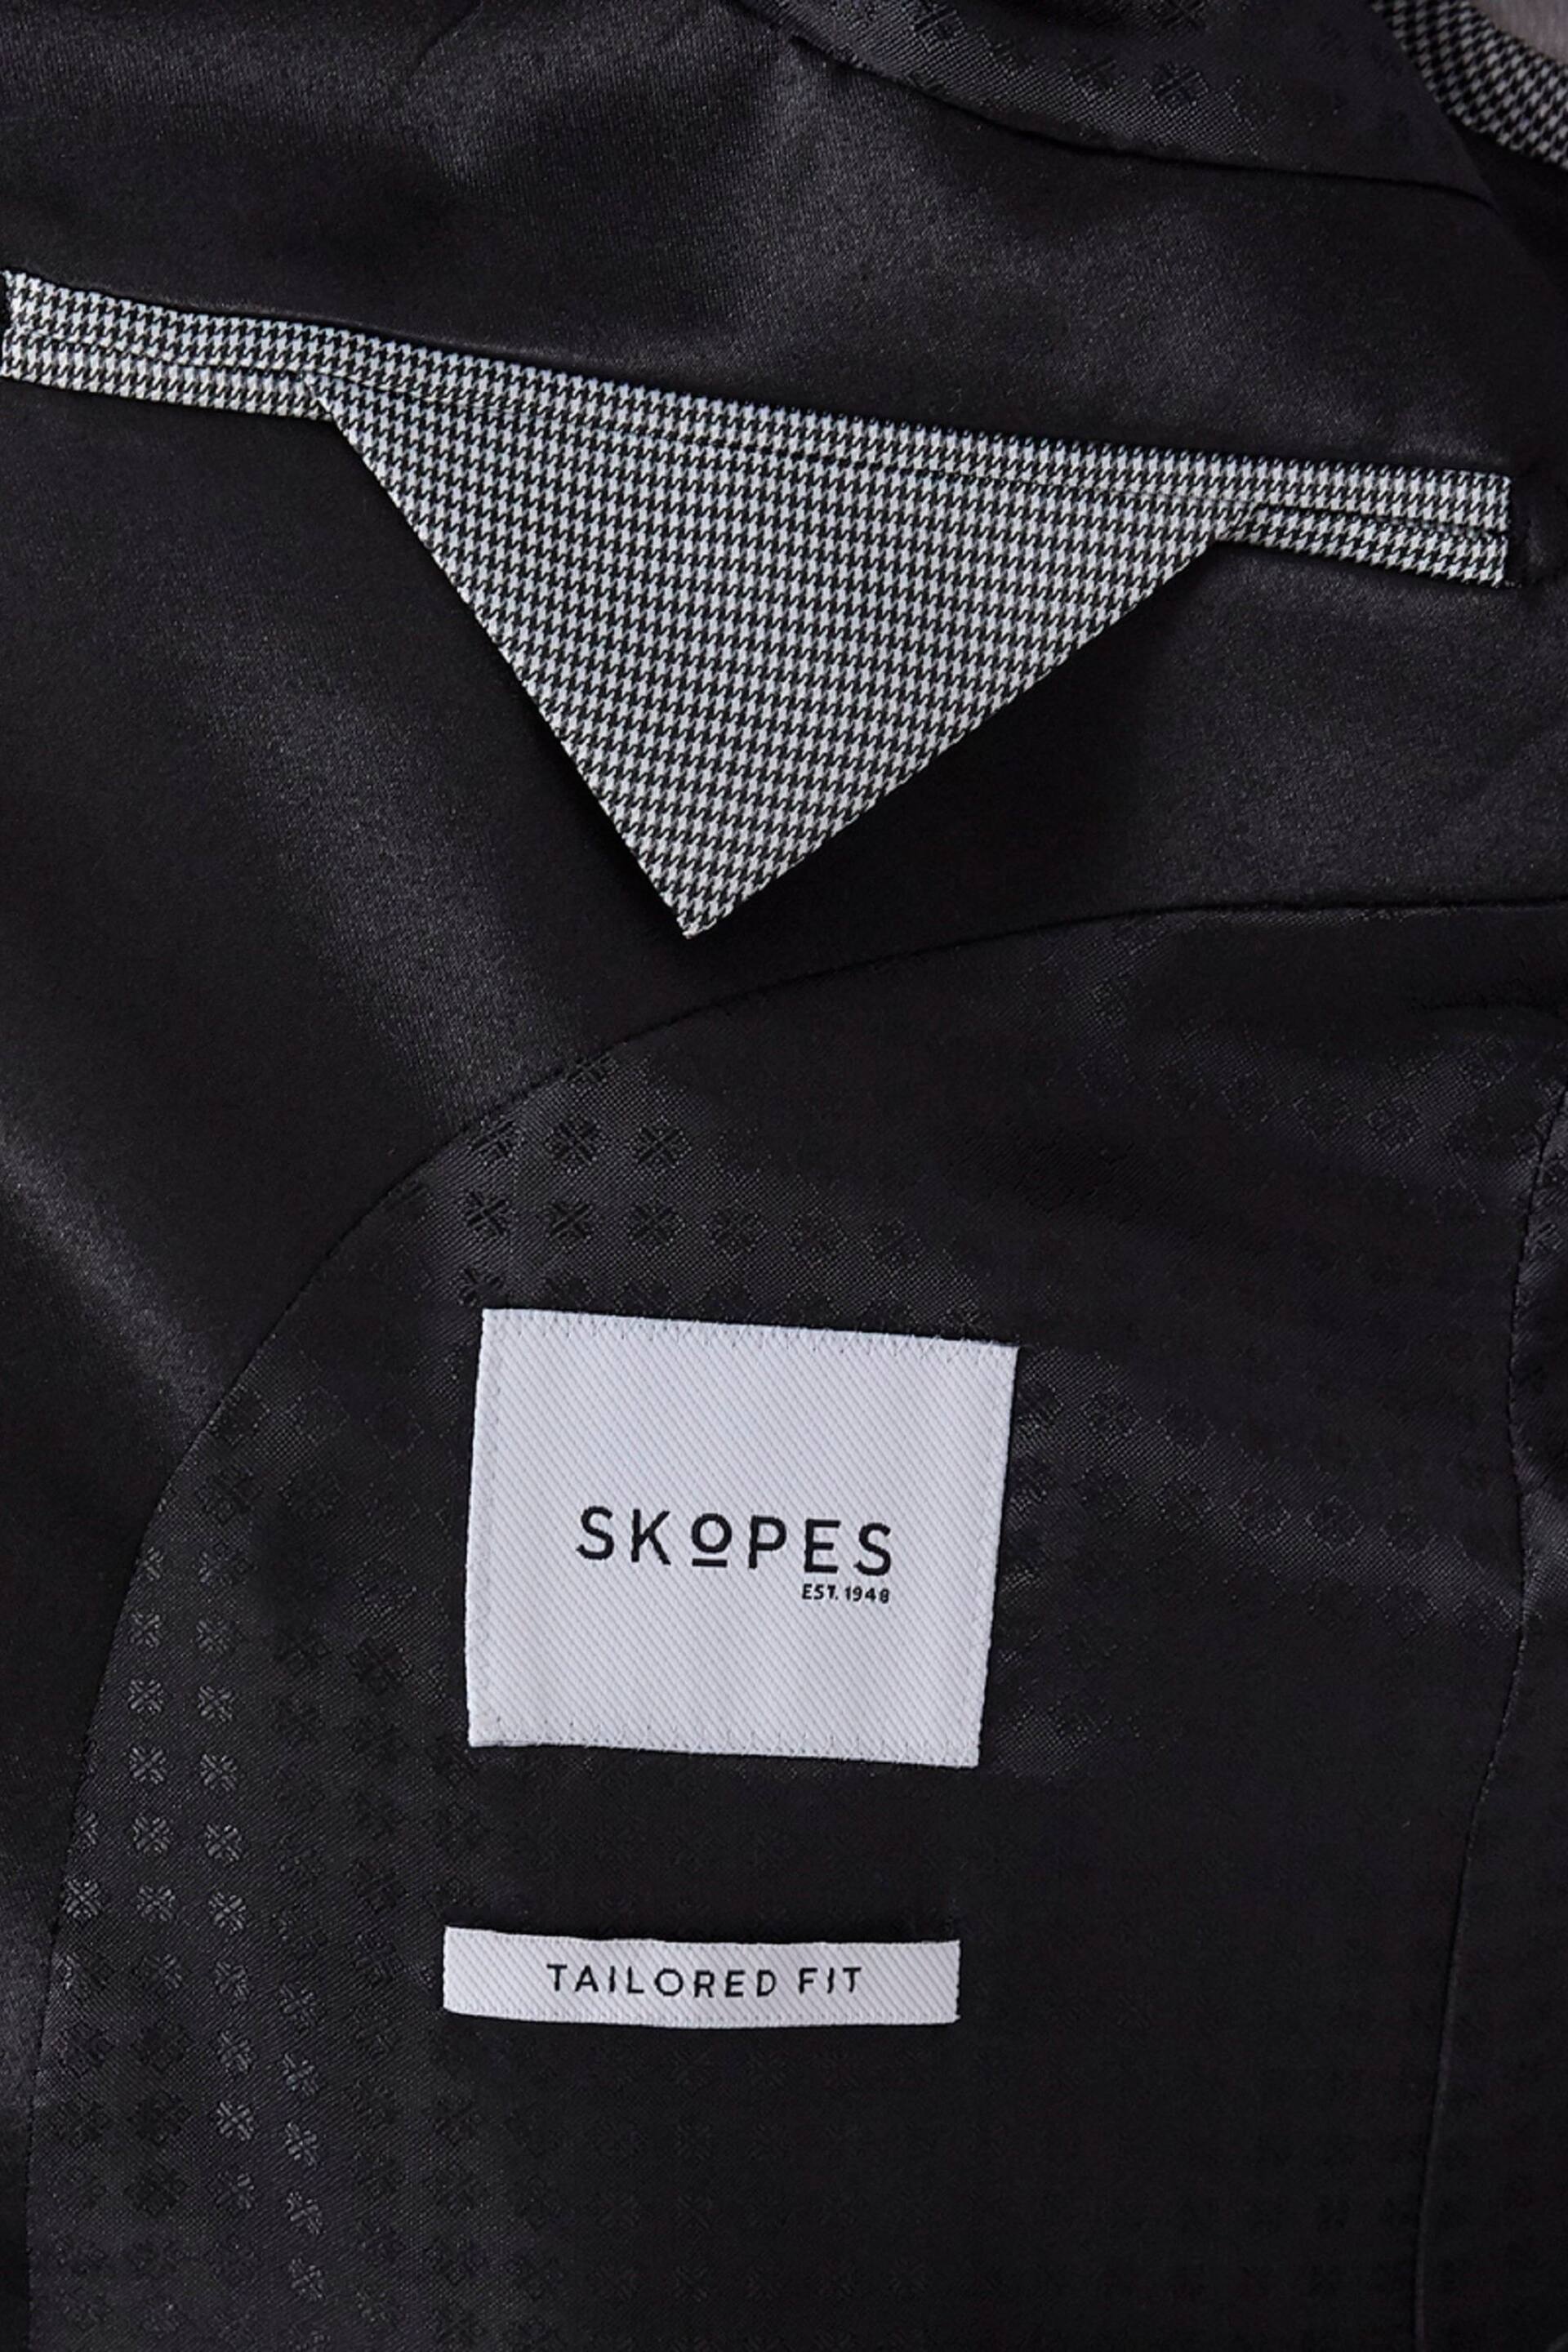 Skopes Sinatra Black Tailored Double Breasted Suit Jacket - Image 4 of 4